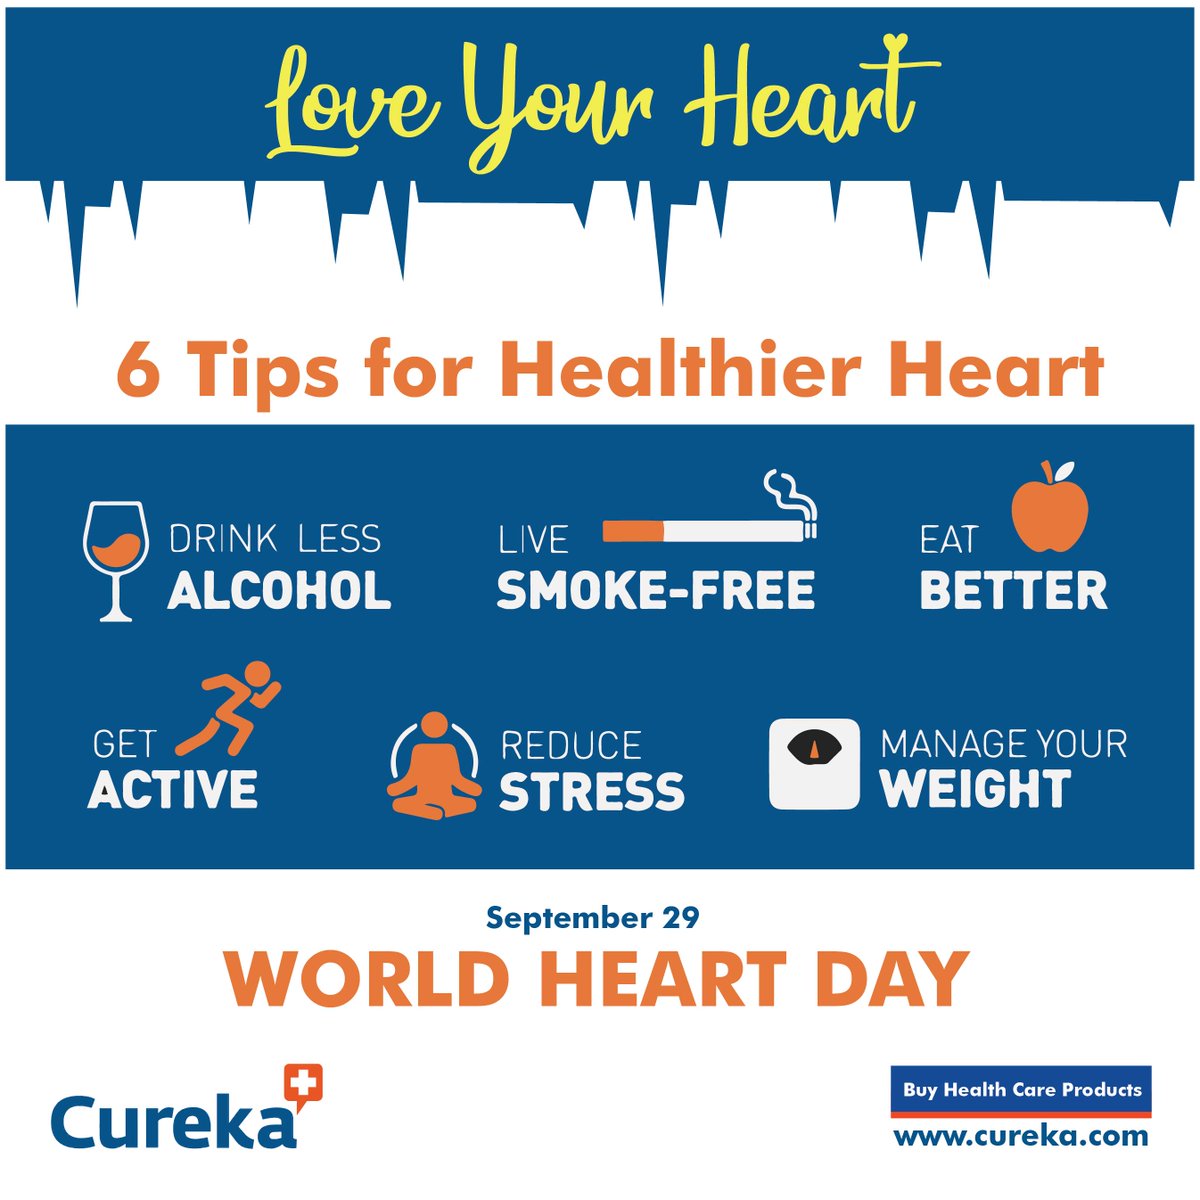 Know your heart better and limit the risk of Heart Disease !!!
#WorldHeartDay #heart #heartbeat #fitness #diet #fitlife #wellness #workout #yoga #healthyeating #loveheart #protectheart #healthtips #healthylifestlye #healthyliving #saveheart #healthyheart #healthtalk #awareness